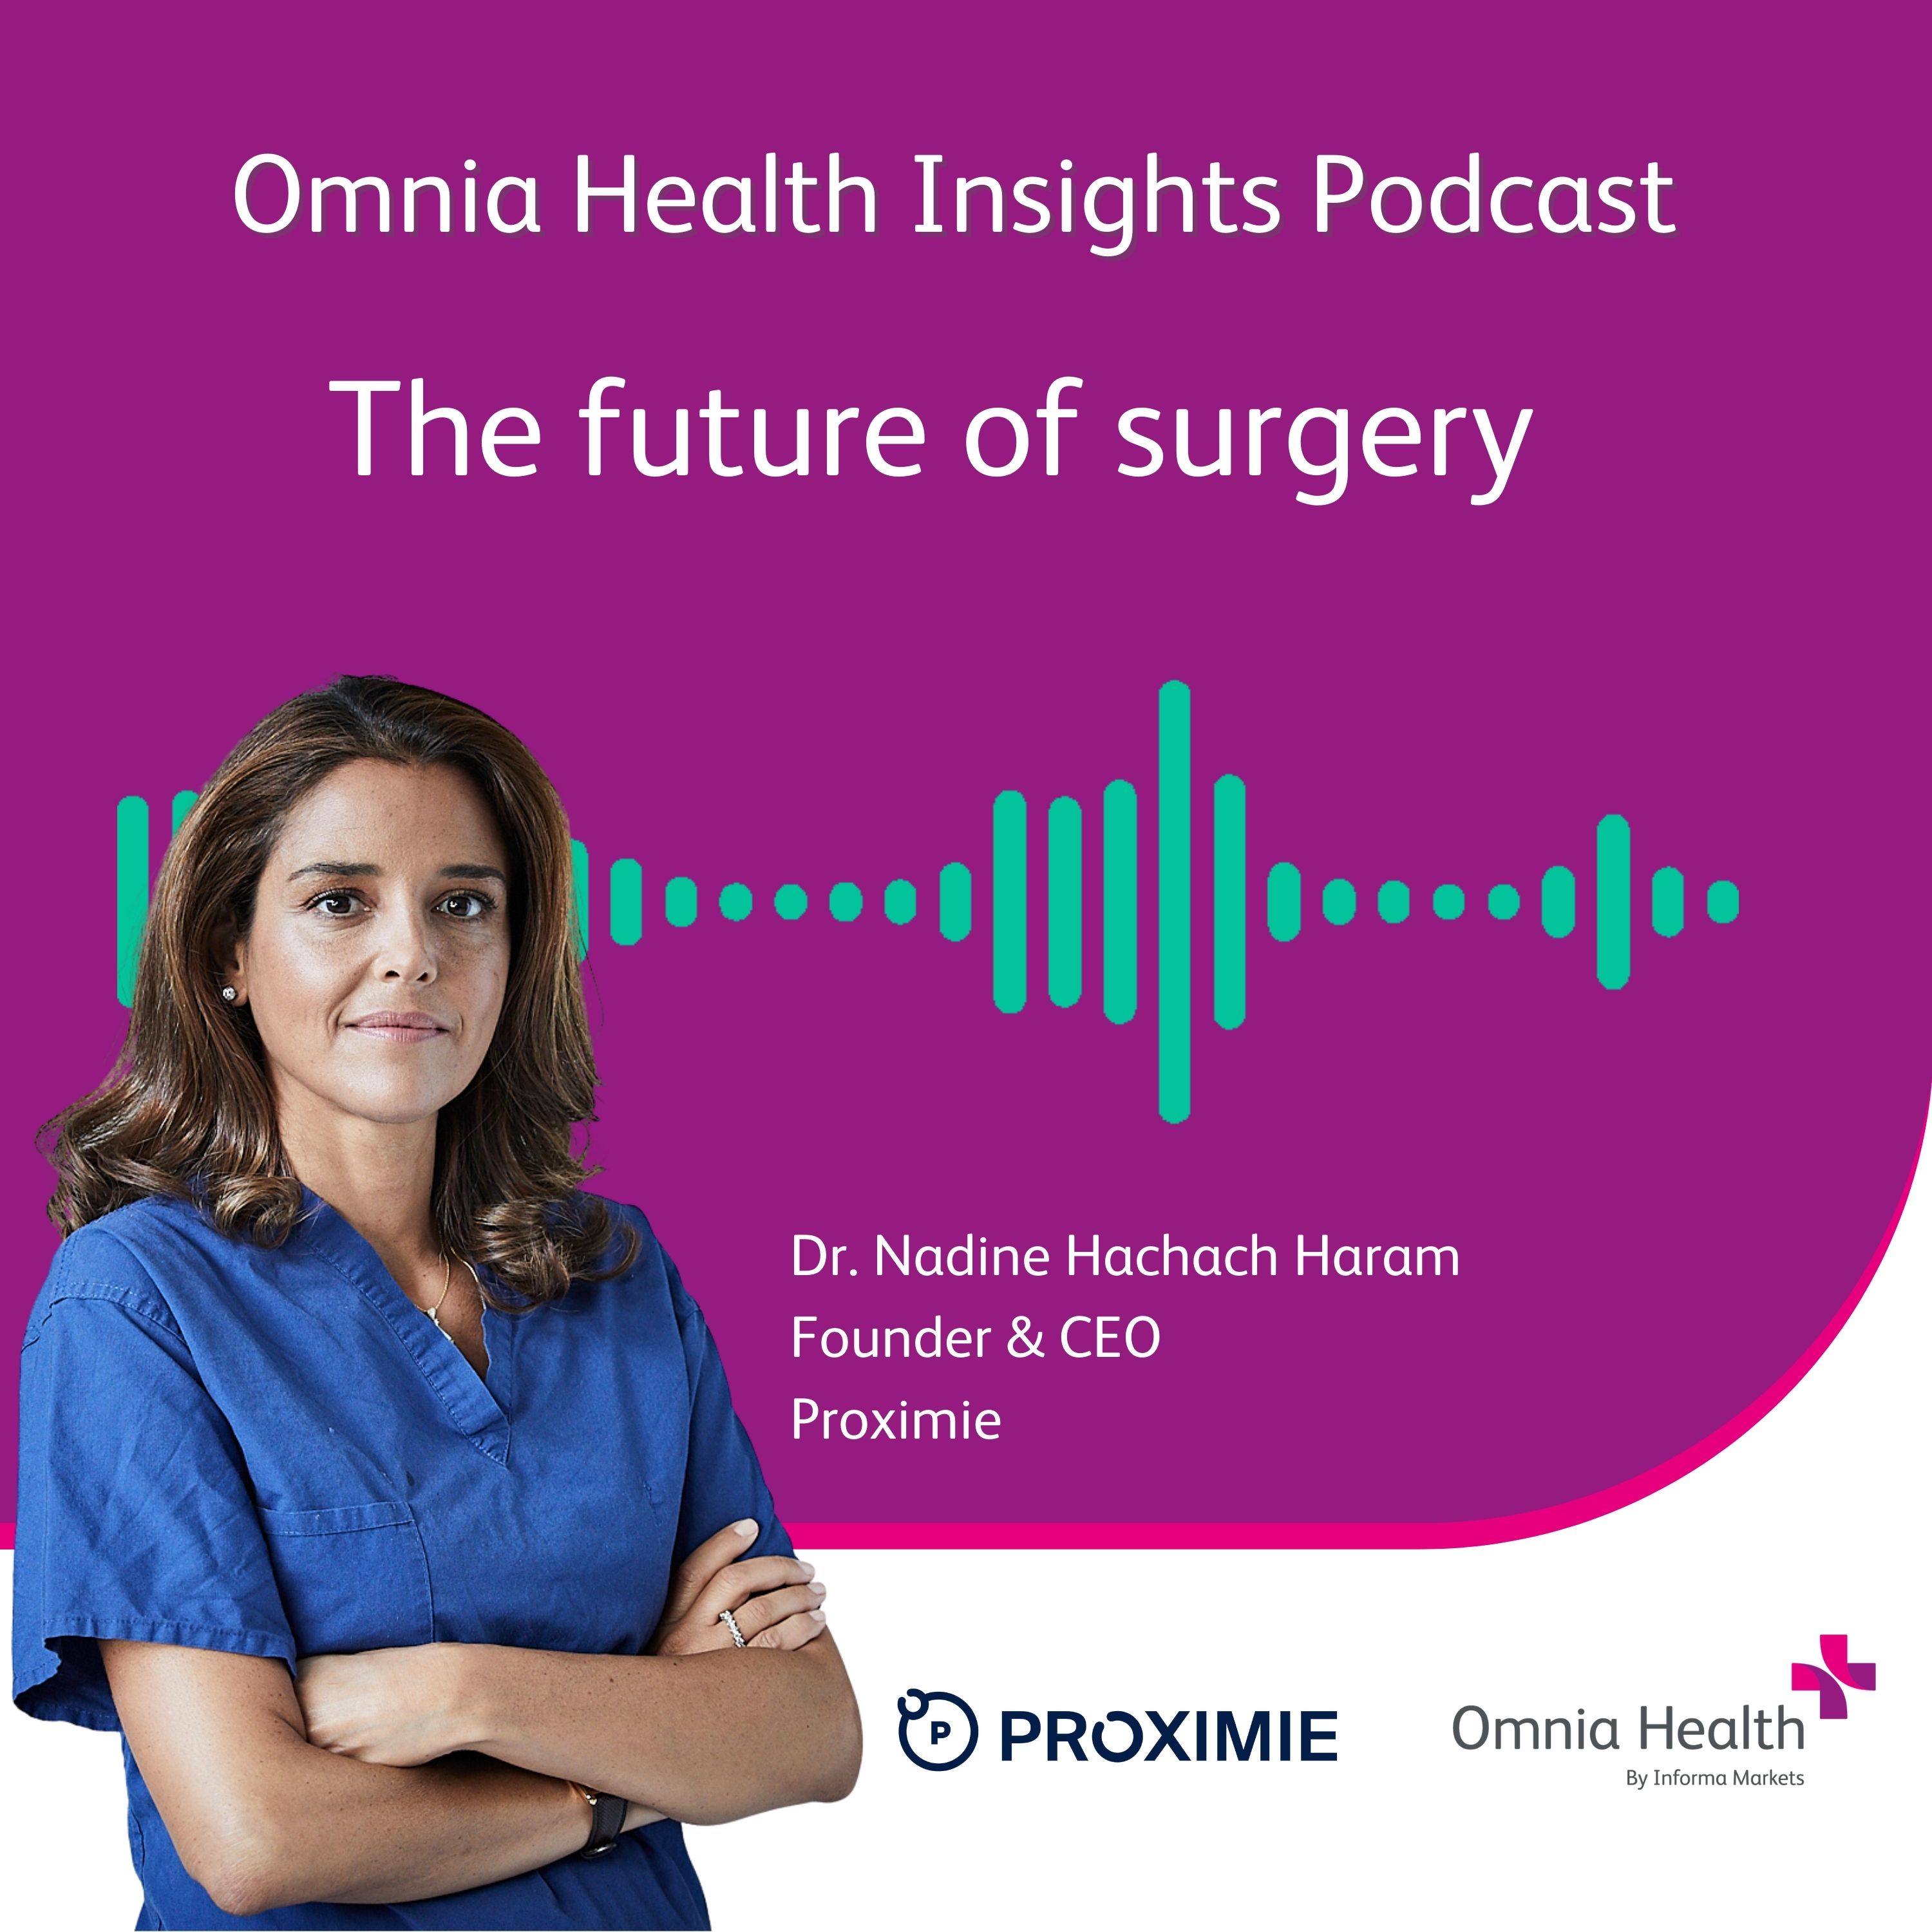 Artwork for podcast Omnia Health Insights Podcast